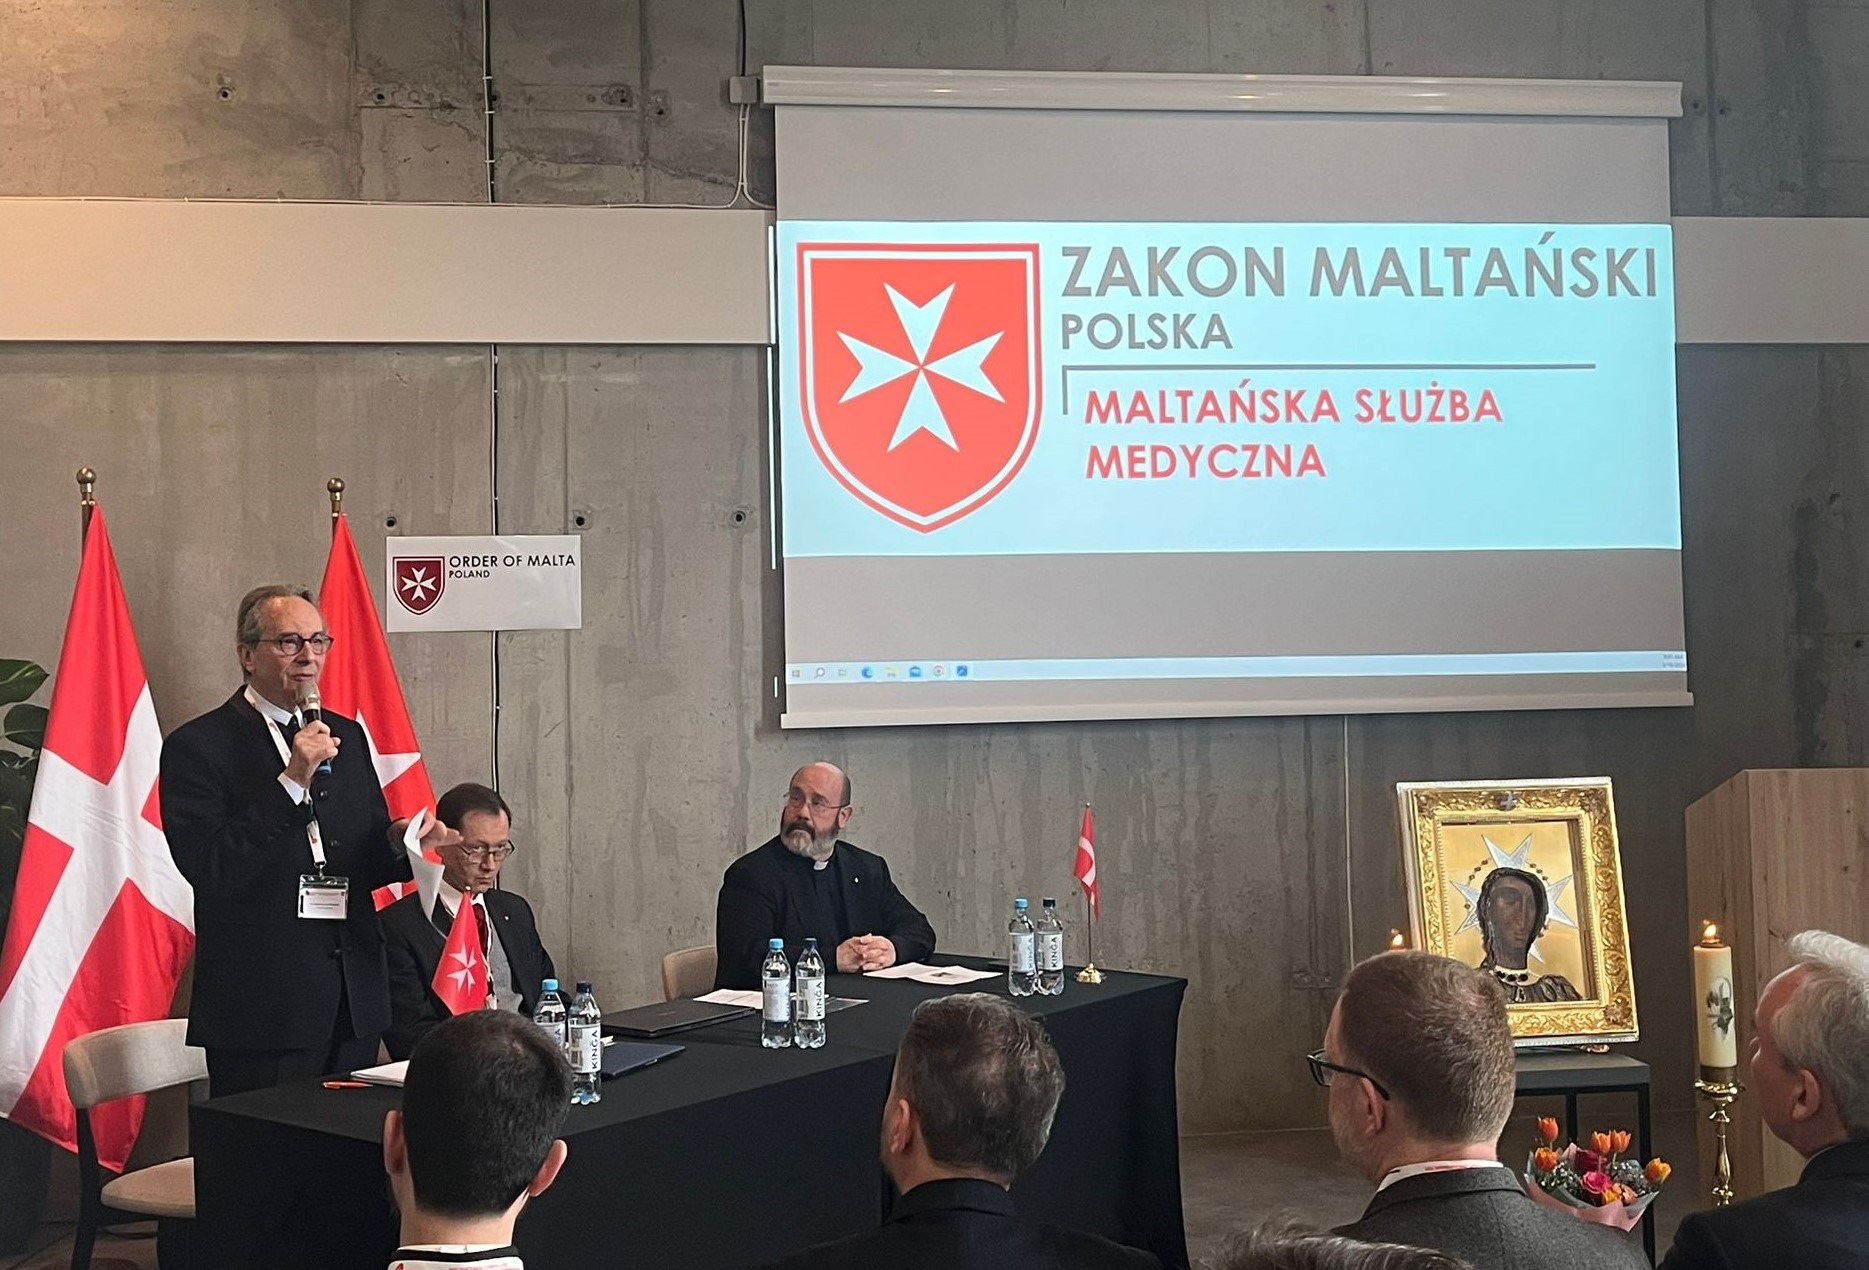 30th International Hospitallers Conference in Krakow